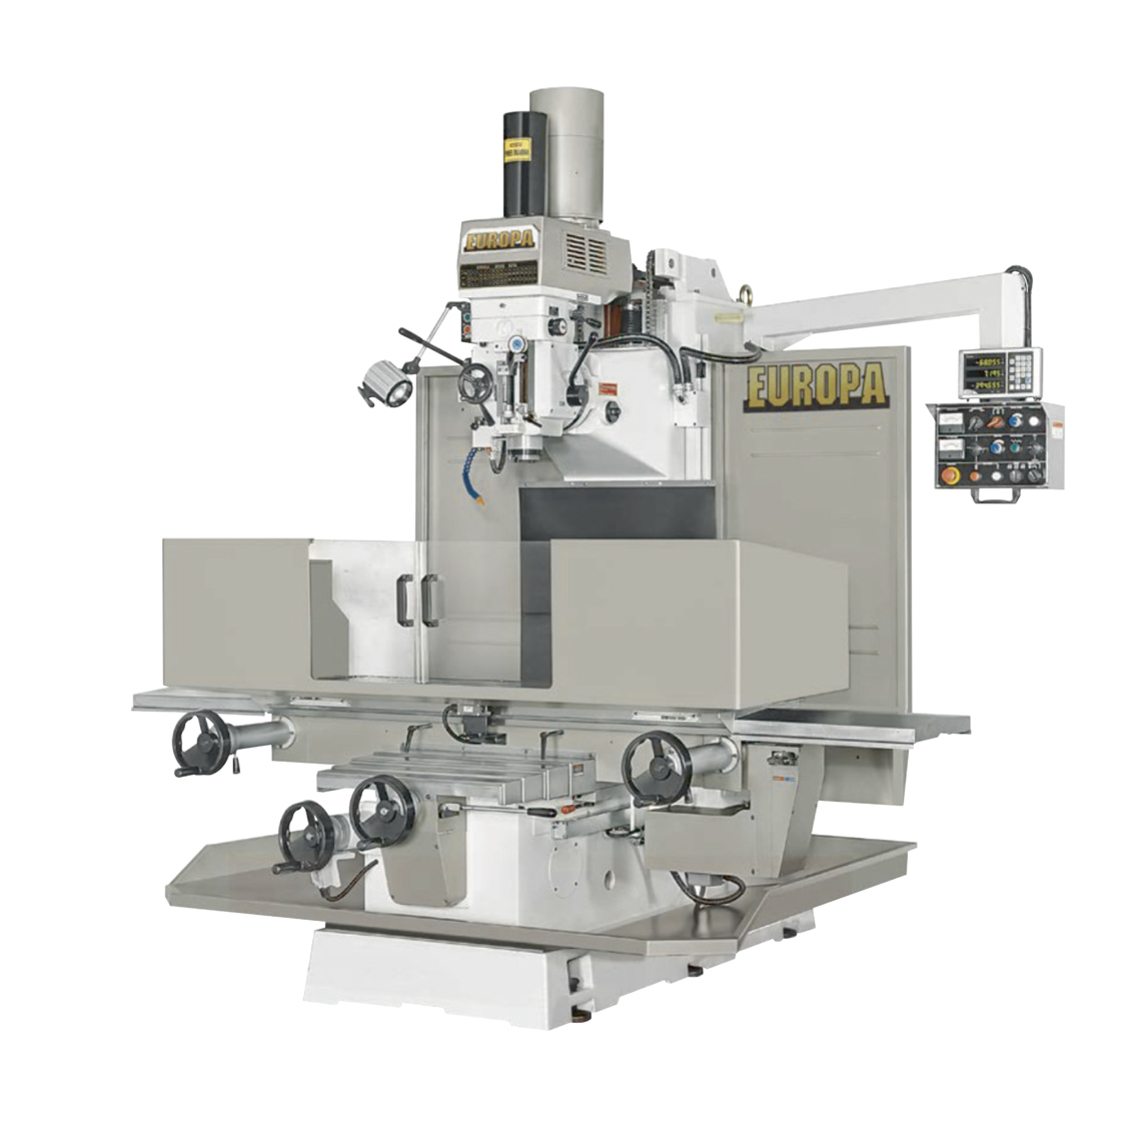 europa bed-type milling machine